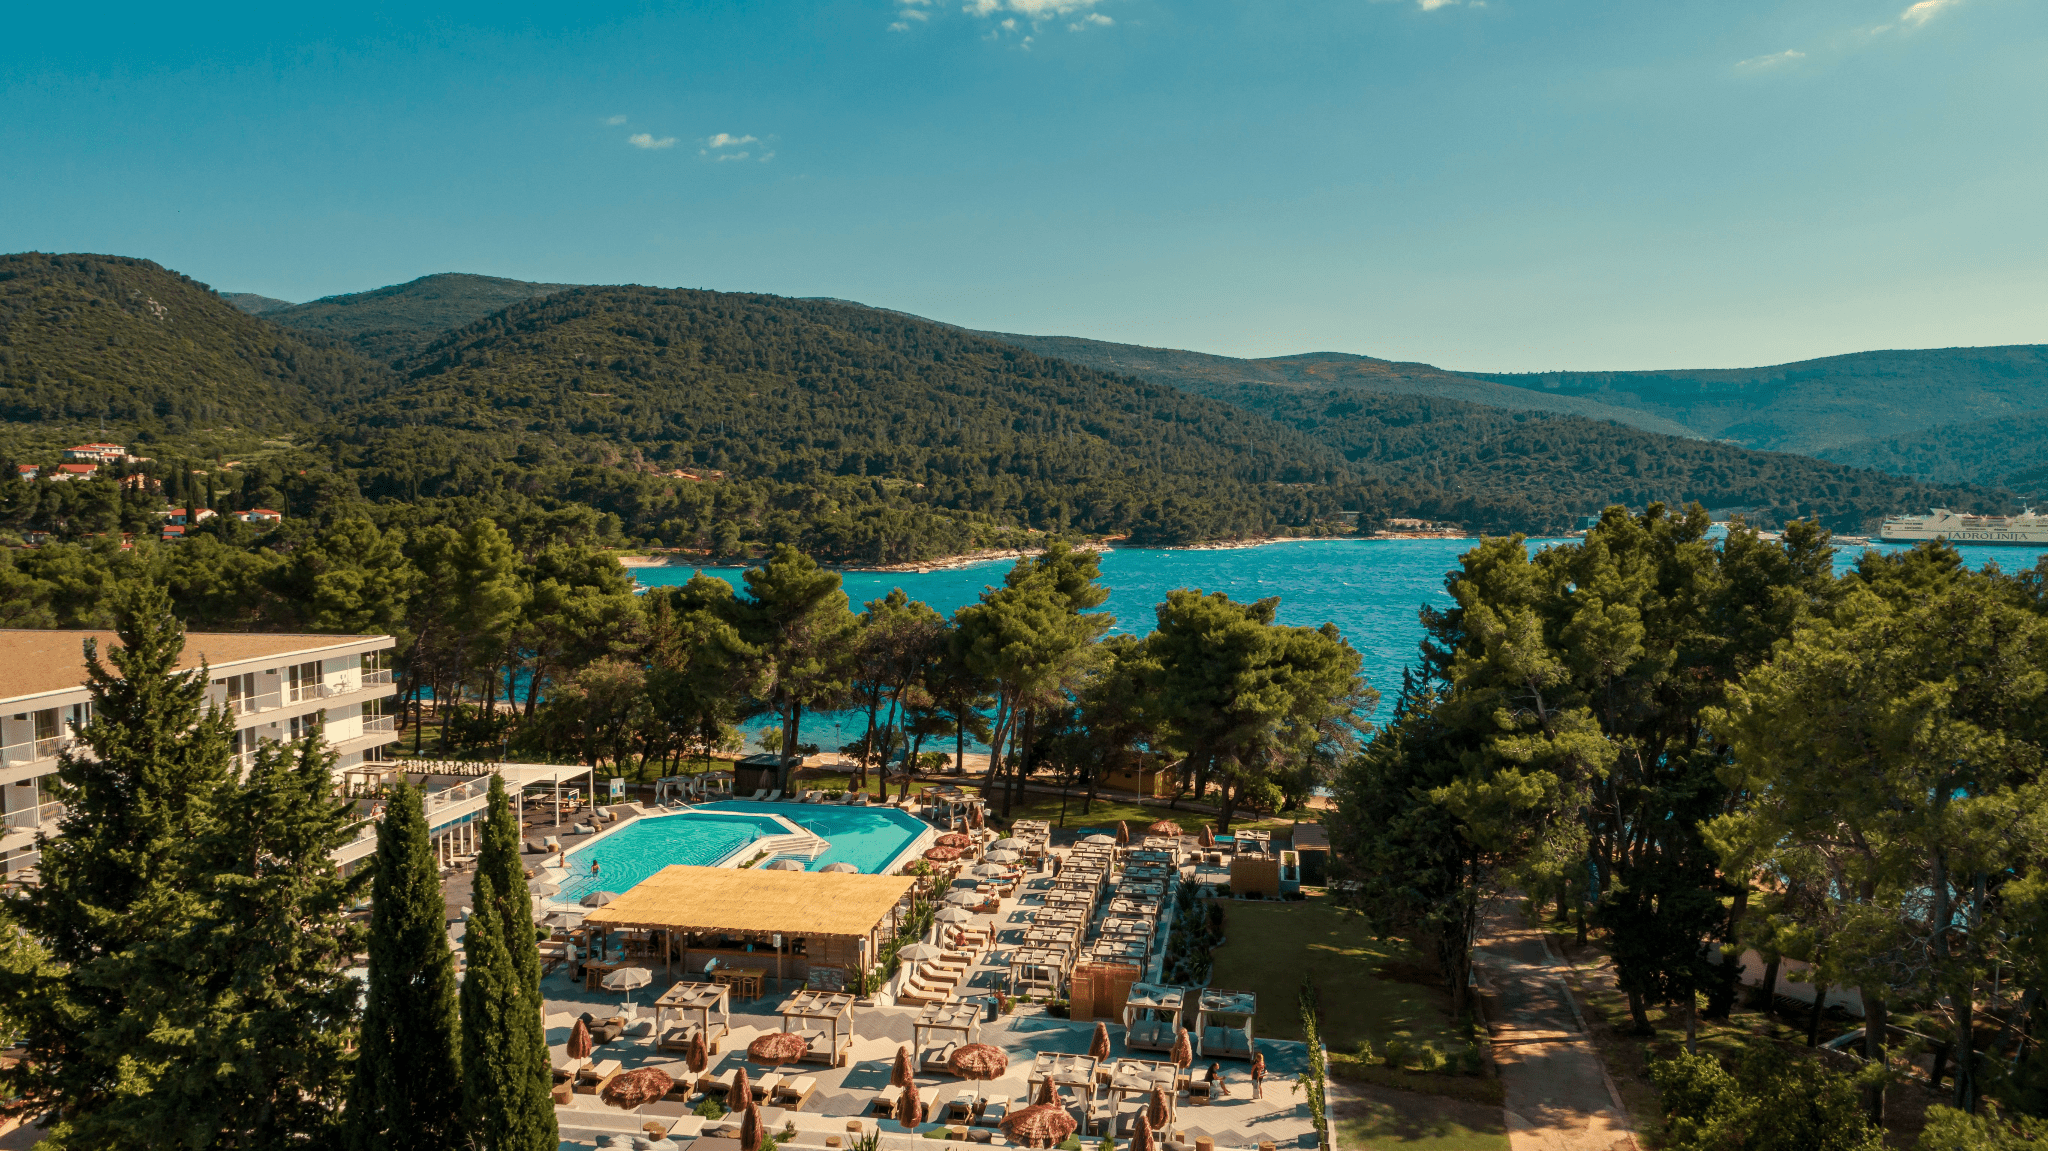 Spinnin’ Records team up with Valamar Hotels to host 13-week showcase in Croatia